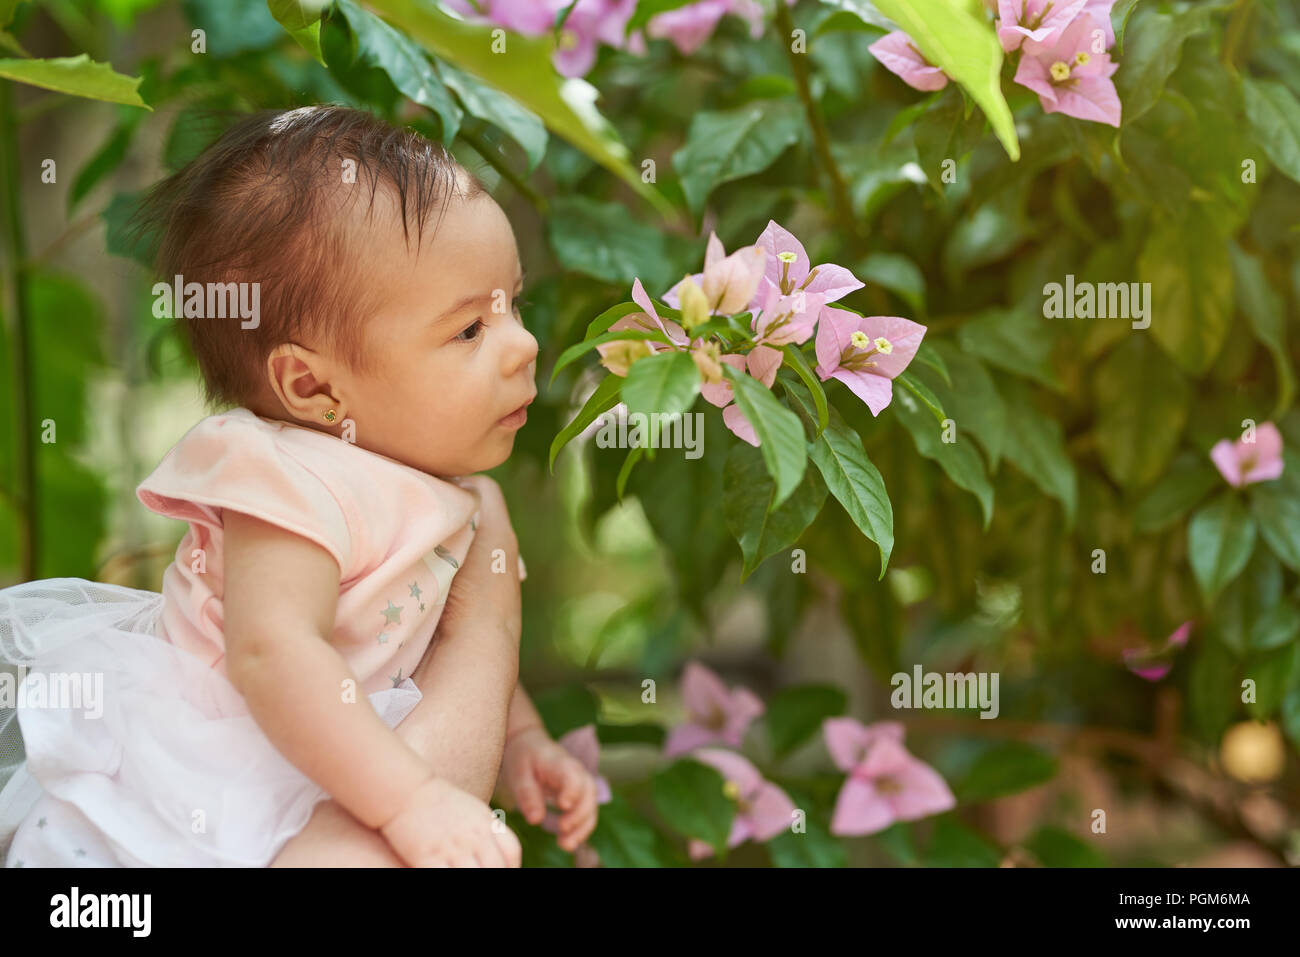 Small baby smell flower on green blurred background Stock Photo